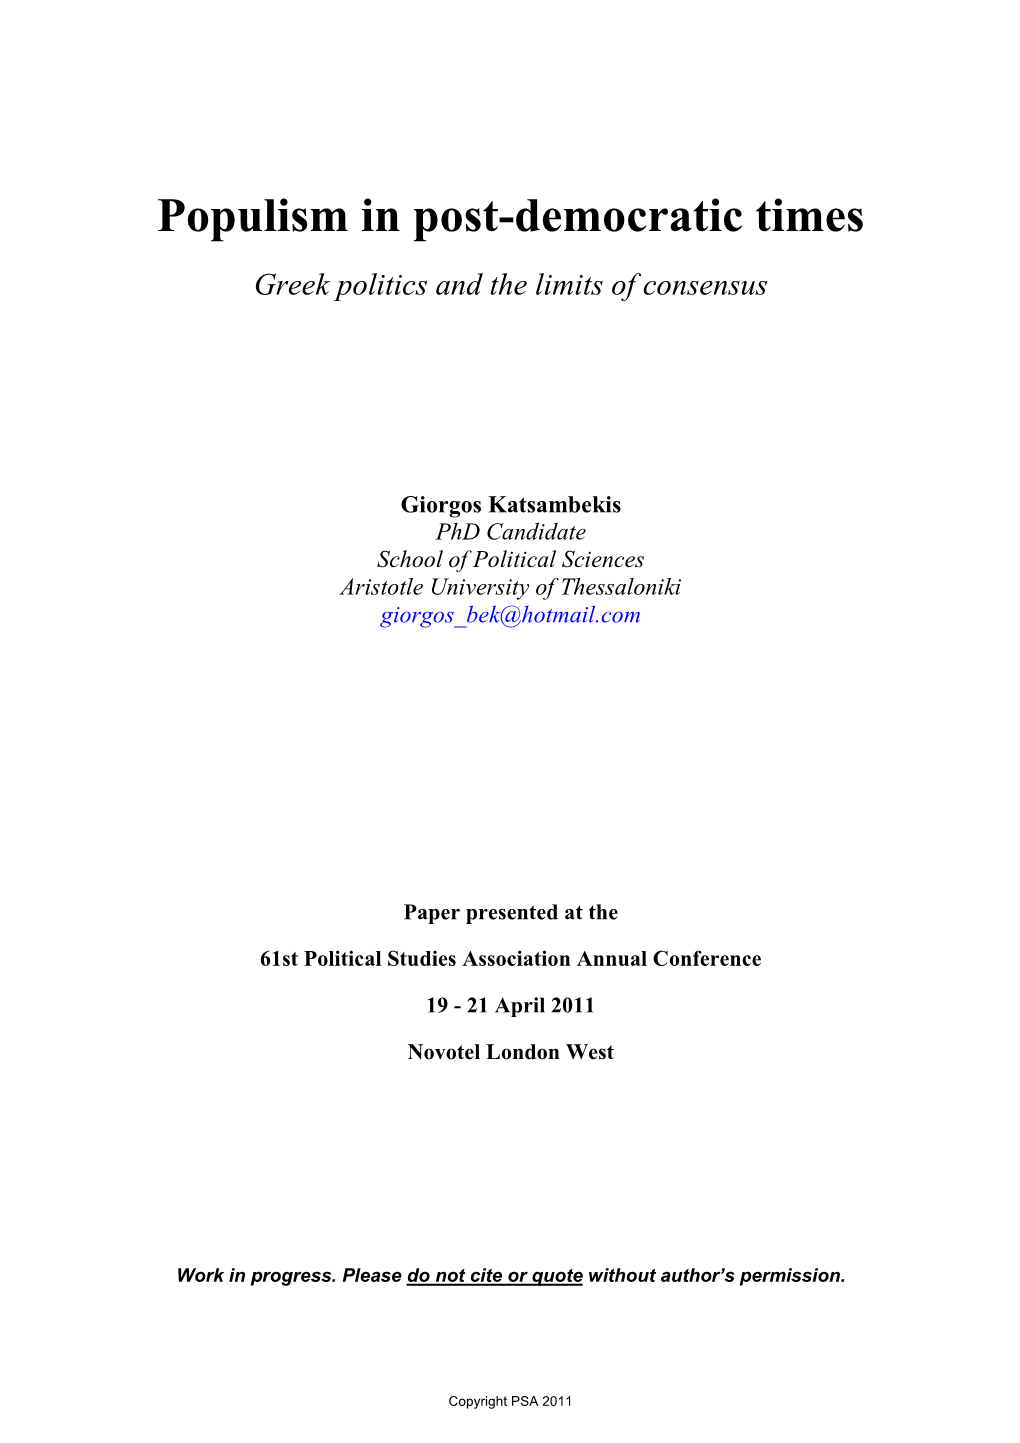 Populism in Post-Democratic Times Greek Politics and the Limits of Consensus